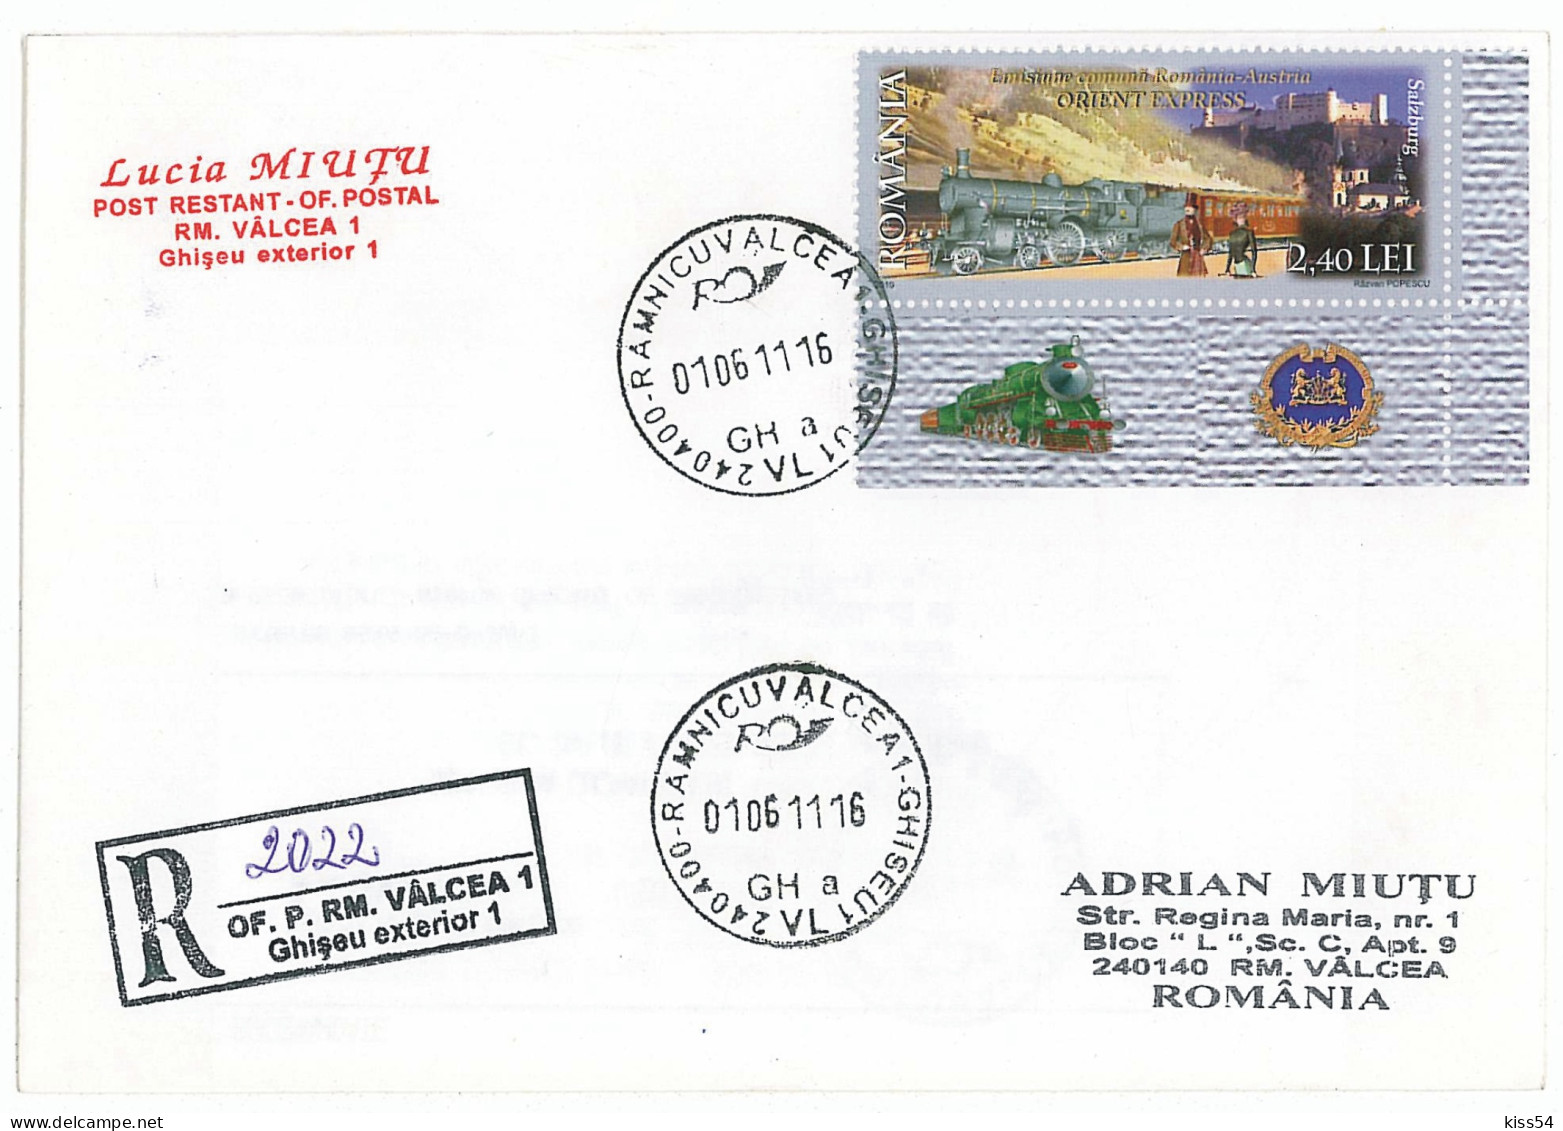 NCP 19 - 2022b-a ORIENT EXPRESS, Salzburg, Romania - Registered, Stamp With TABS - 2011 - Trenes